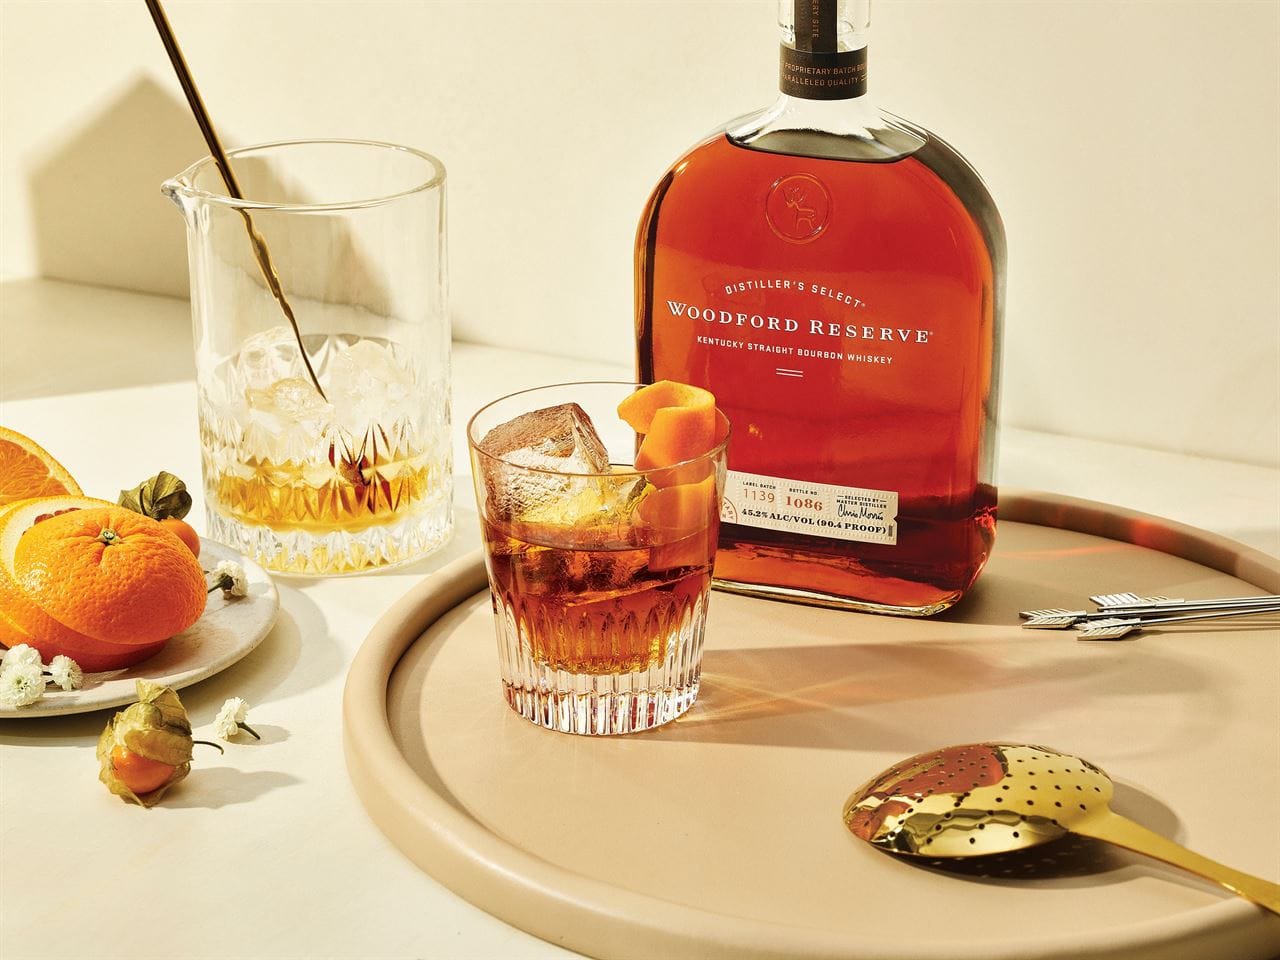 Woodford Reserve et le Old Fashioned, 160 ans d’histoire